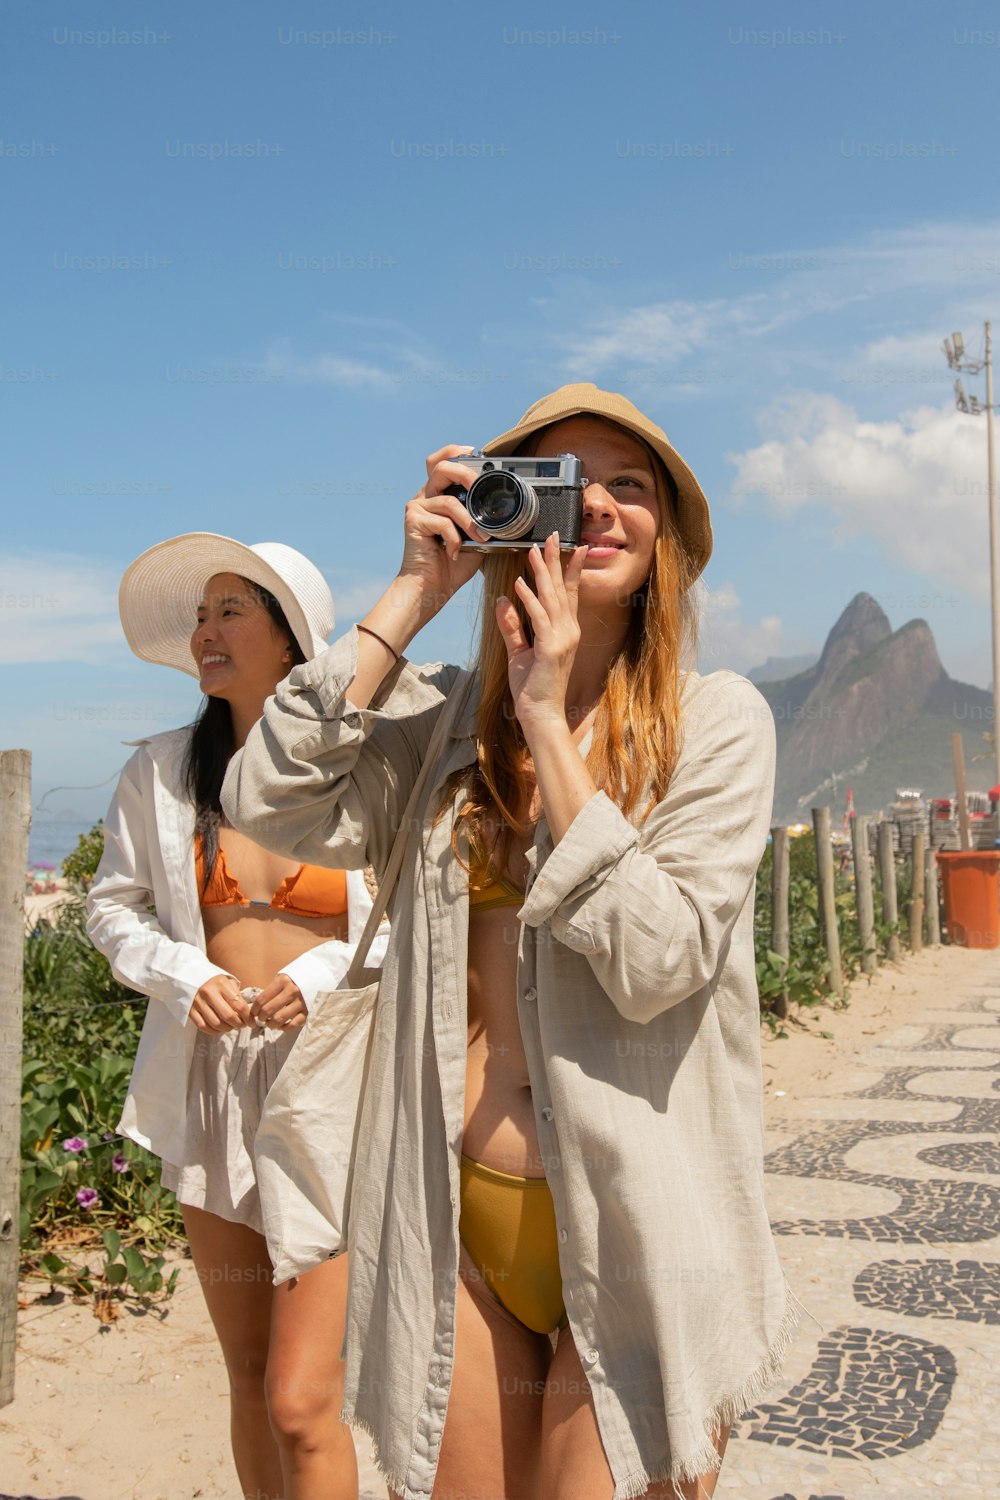 two women in bikinis taking a picture with a camera